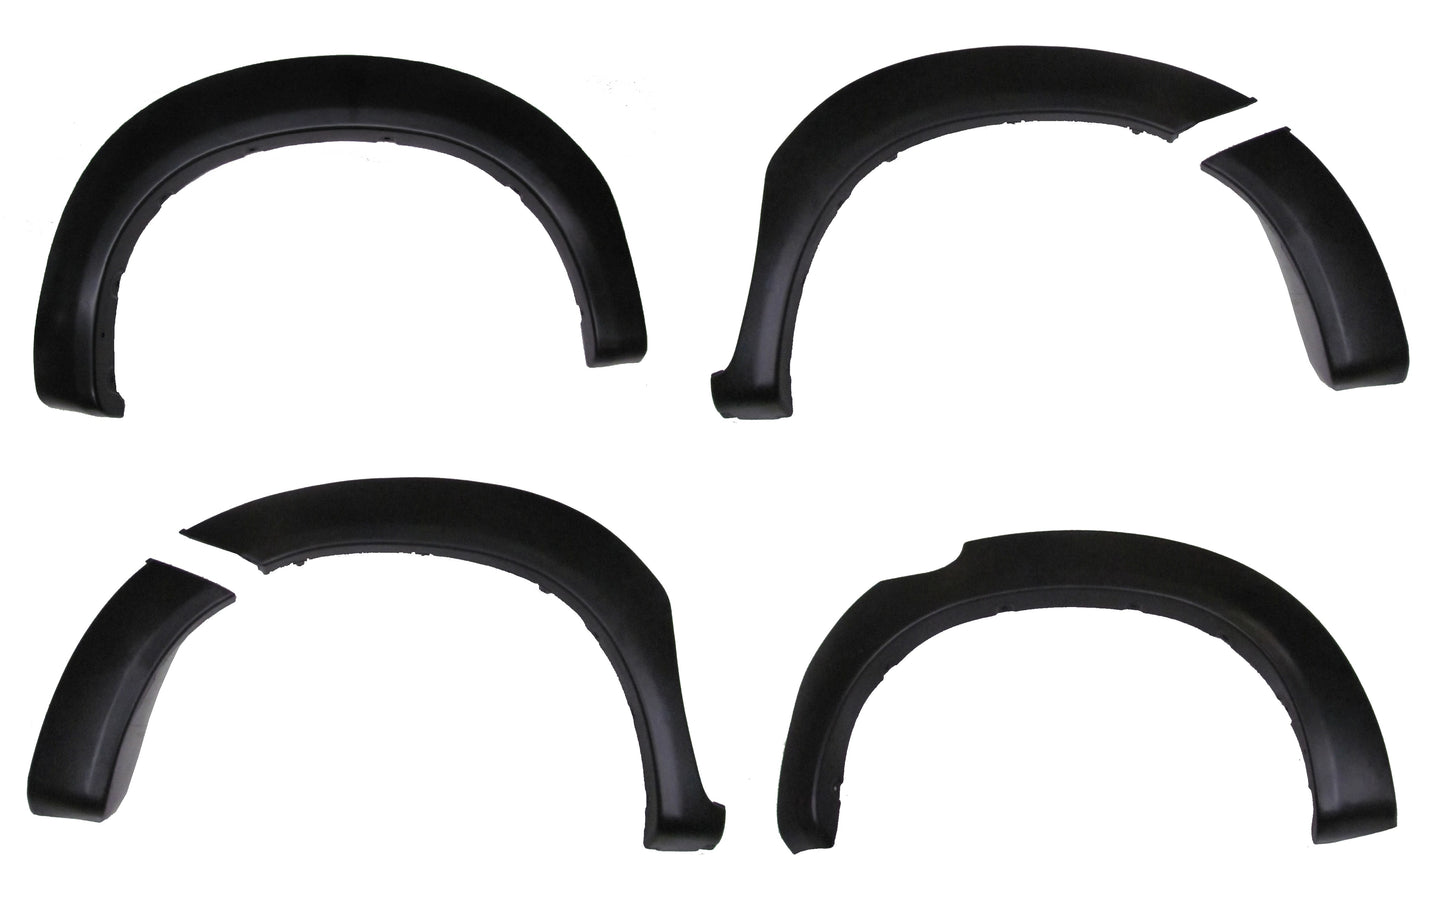 ABS Wheel Arch Kit in ABS plastic - 6 pc Kit - for Toyota Hilux Mk6